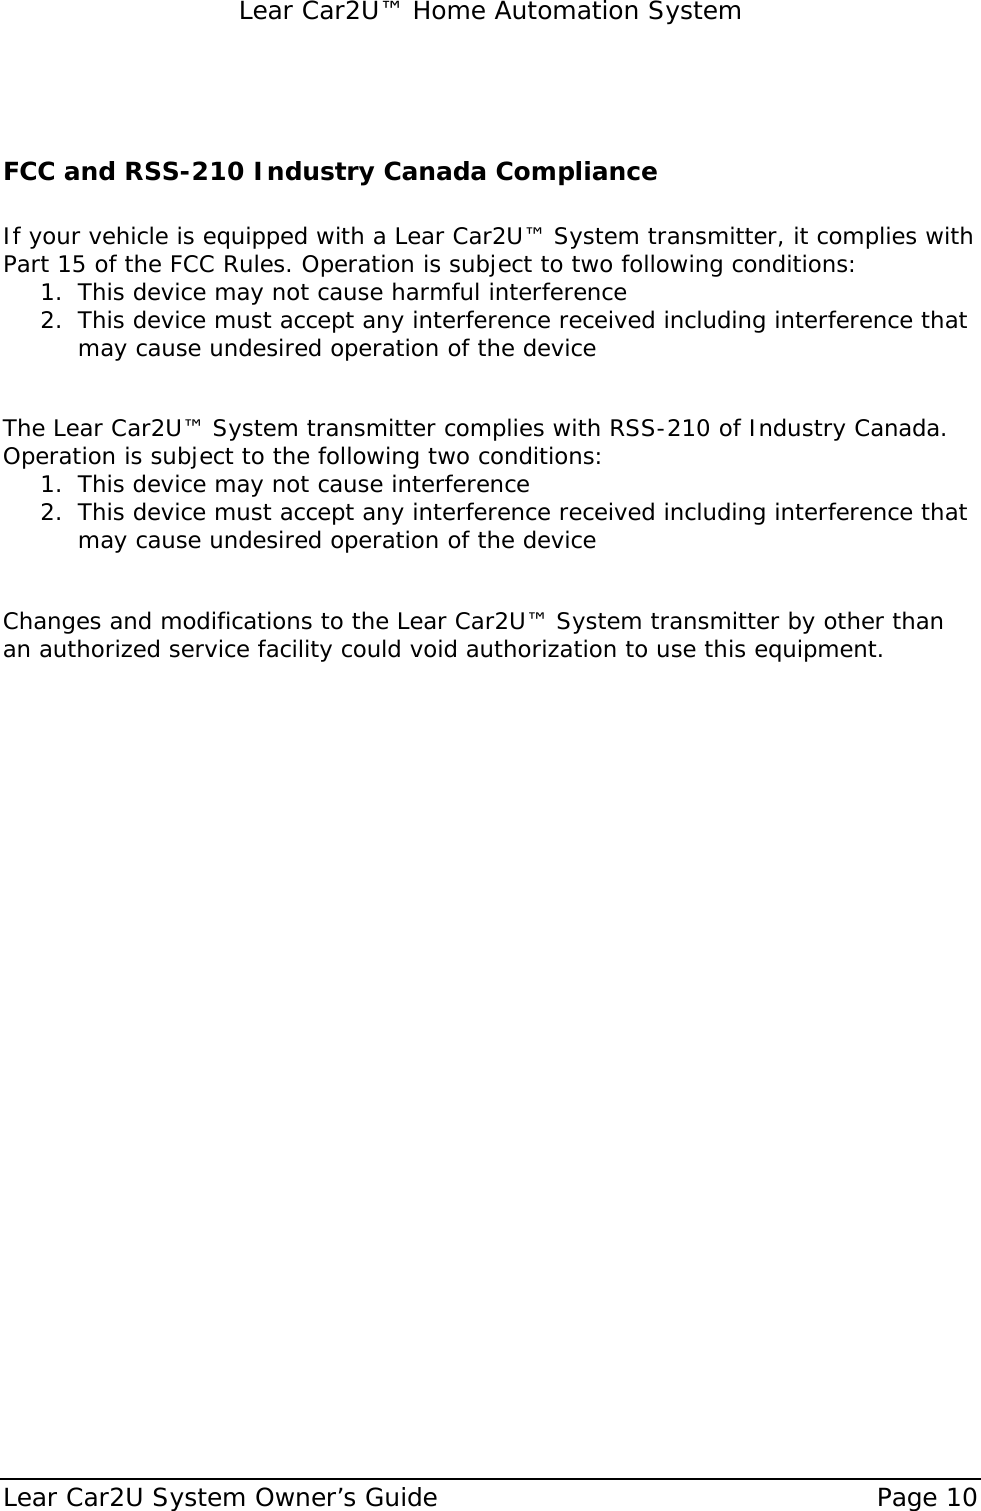   Lear Car2U™ Home Automation System Lear Car2U System Owner’s Guide    Page 10    FCC and RSS-210 Industry Canada Compliance  If your vehicle is equipped with a Lear Car2U™ System transmitter, it complies with Part 15 of the FCC Rules. Operation is subject to two following conditions: 1. This device may not cause harmful interference 2. This device must accept any interference received including interference that may cause undesired operation of the device  The Lear Car2U™ System transmitter complies with RSS-210 of Industry Canada. Operation is subject to the following two conditions: 1. This device may not cause interference 2. This device must accept any interference received including interference that may cause undesired operation of the device  Changes and modifications to the Lear Car2U™ System transmitter by other than an authorized service facility could void authorization to use this equipment. 